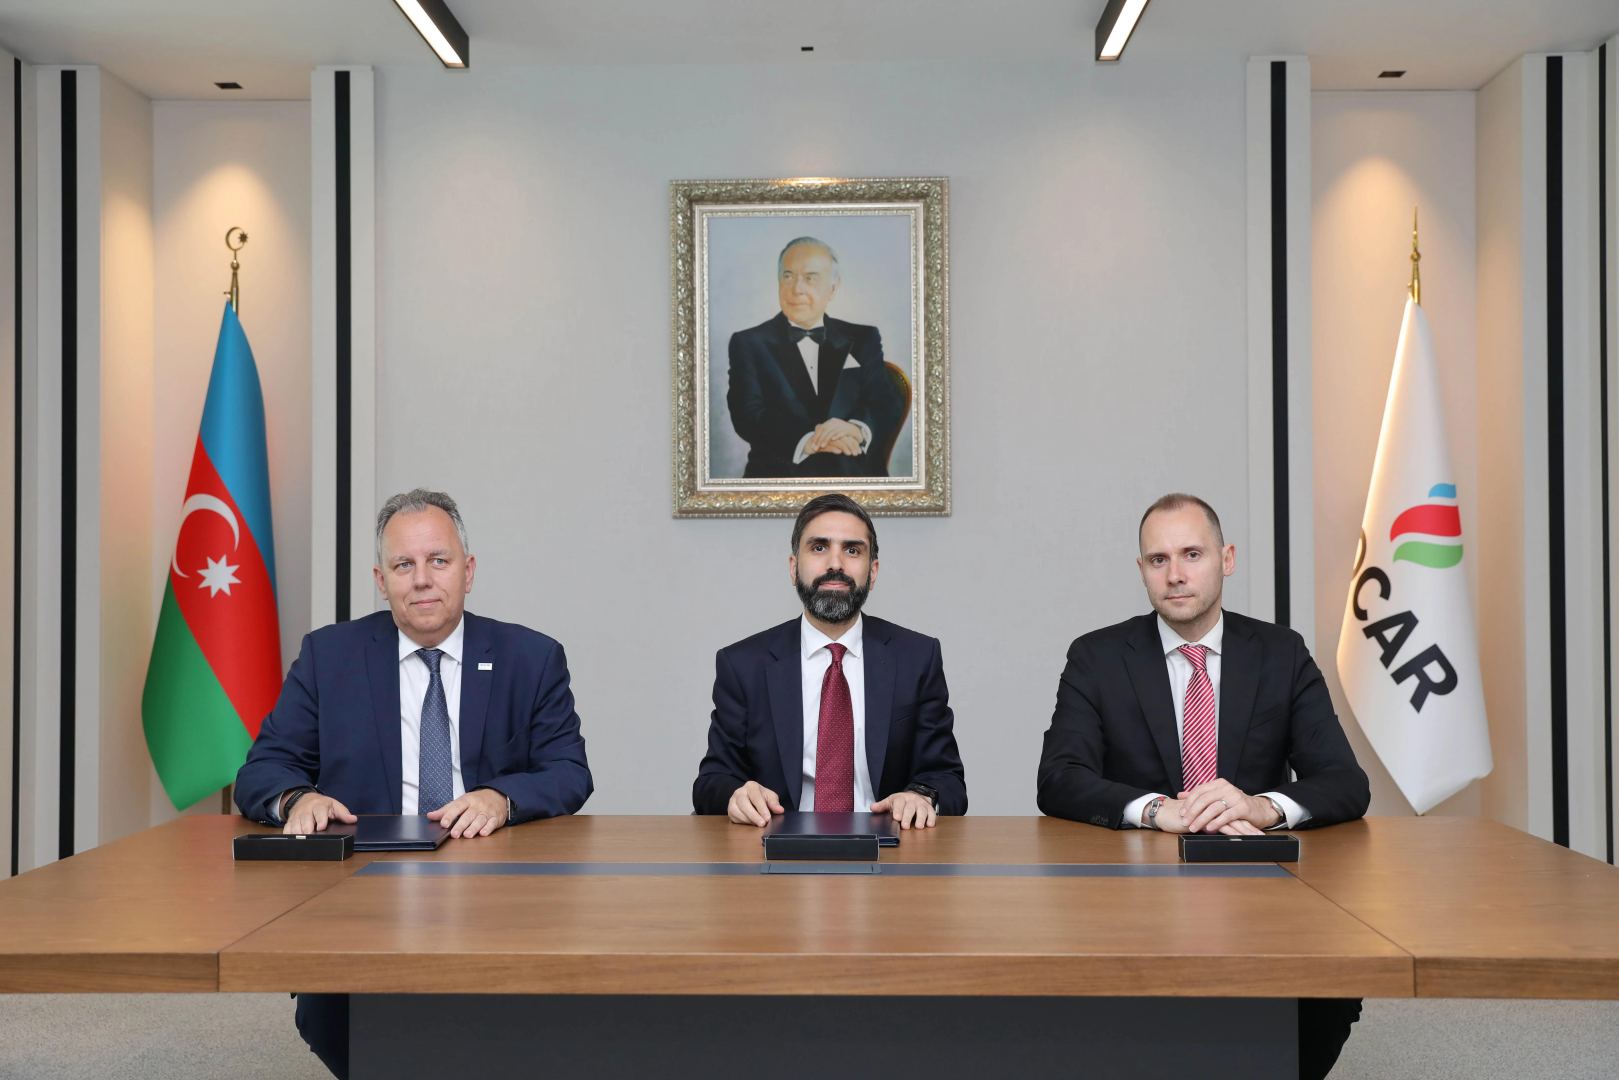 SOCAR, MVM Group sign agreement on sale of 100 mcm of natural gas